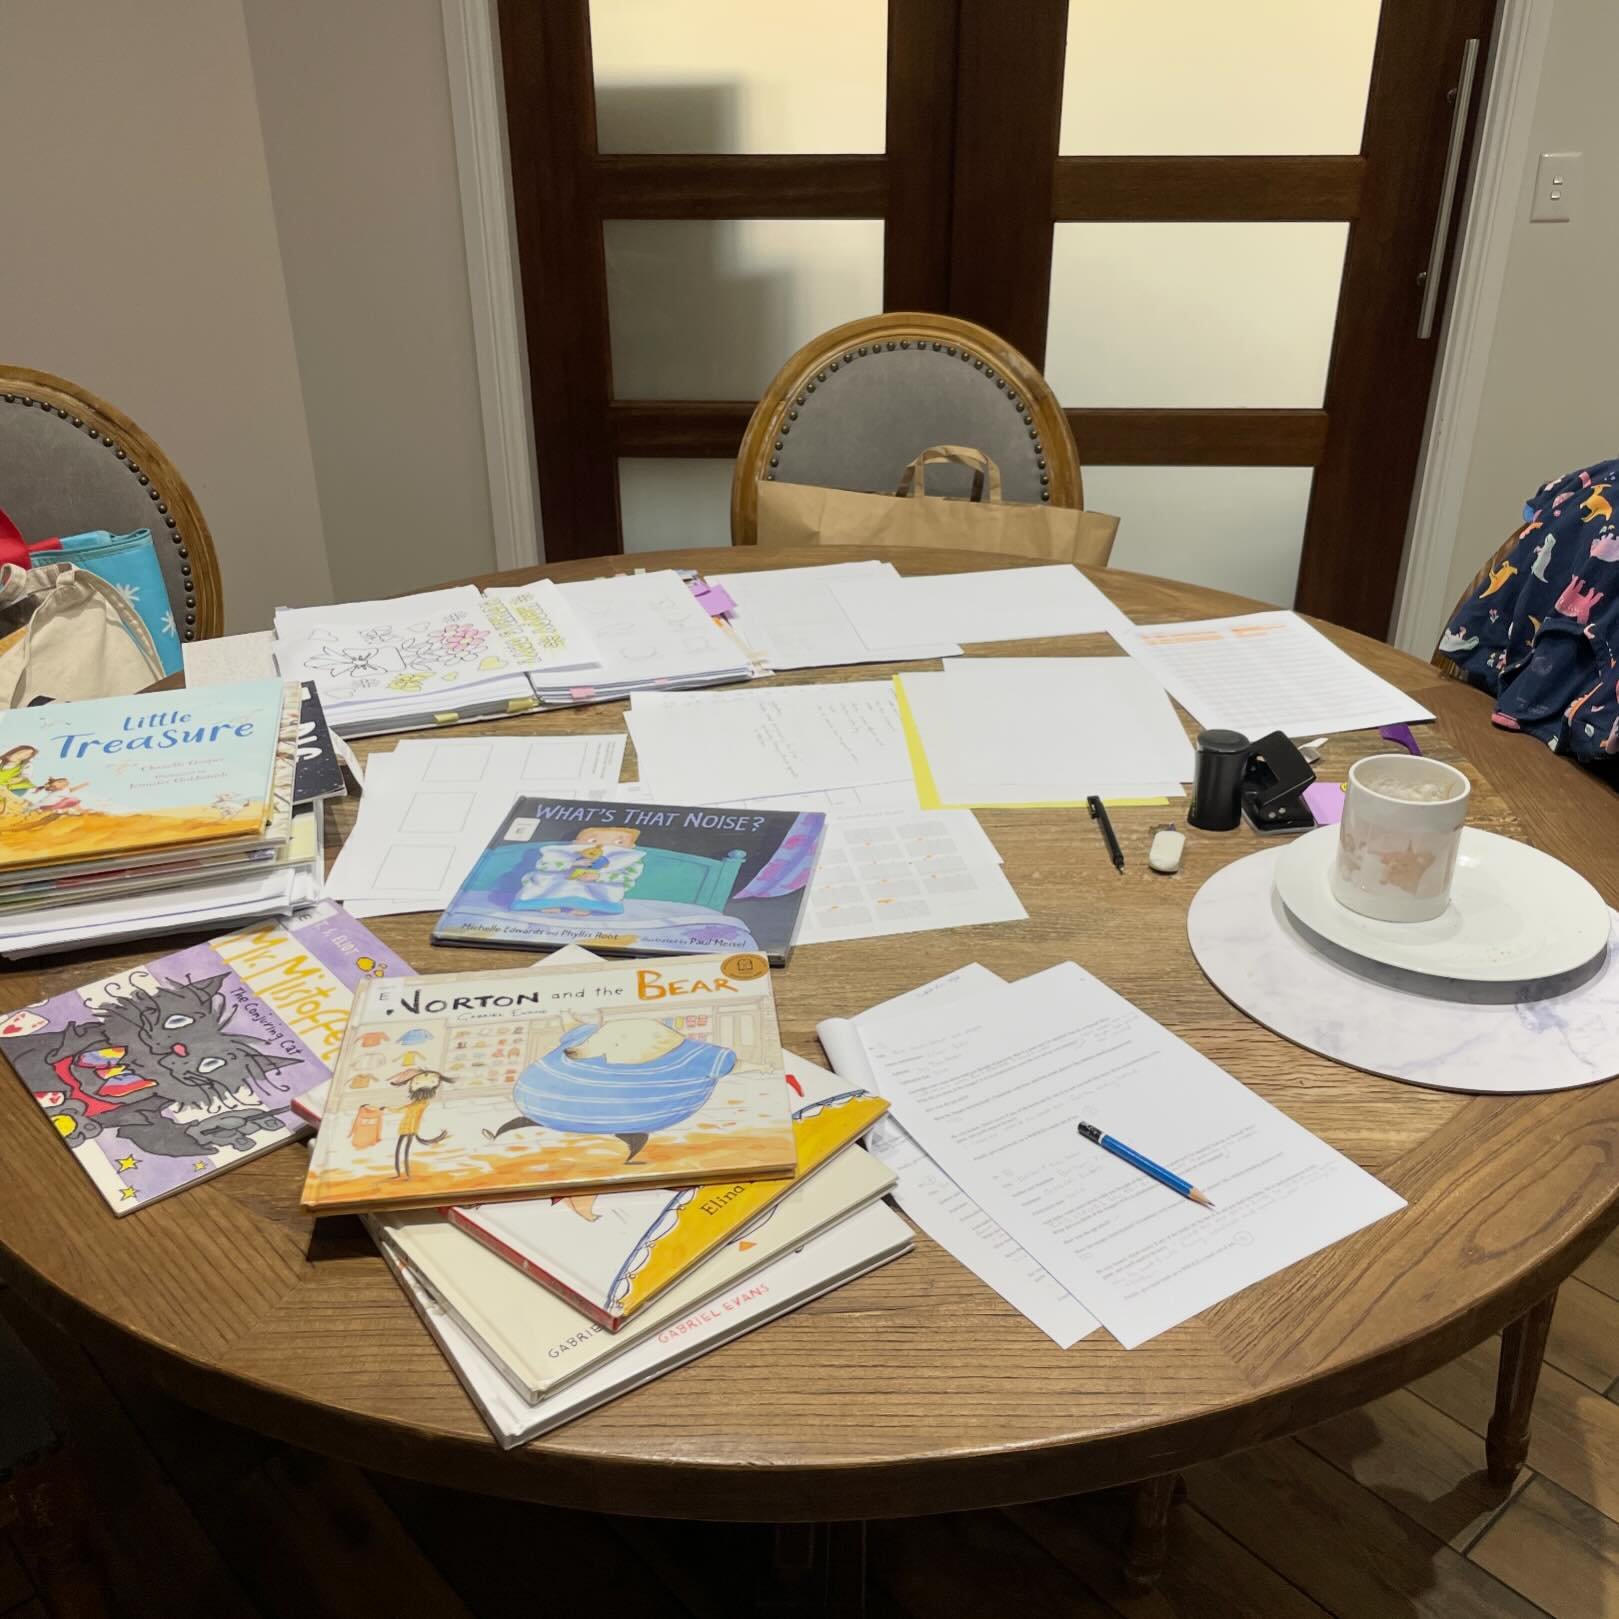 My week is on this table 😂🤯

Finished my 2nd draft - for CYA boot camp. 
Noted some exciting illustration ideas to go with it, yay!✨

Started @cyaconference judging and absolutely love it 💕

Now catch up on @kidlitvic illustration workshop &rsquo;